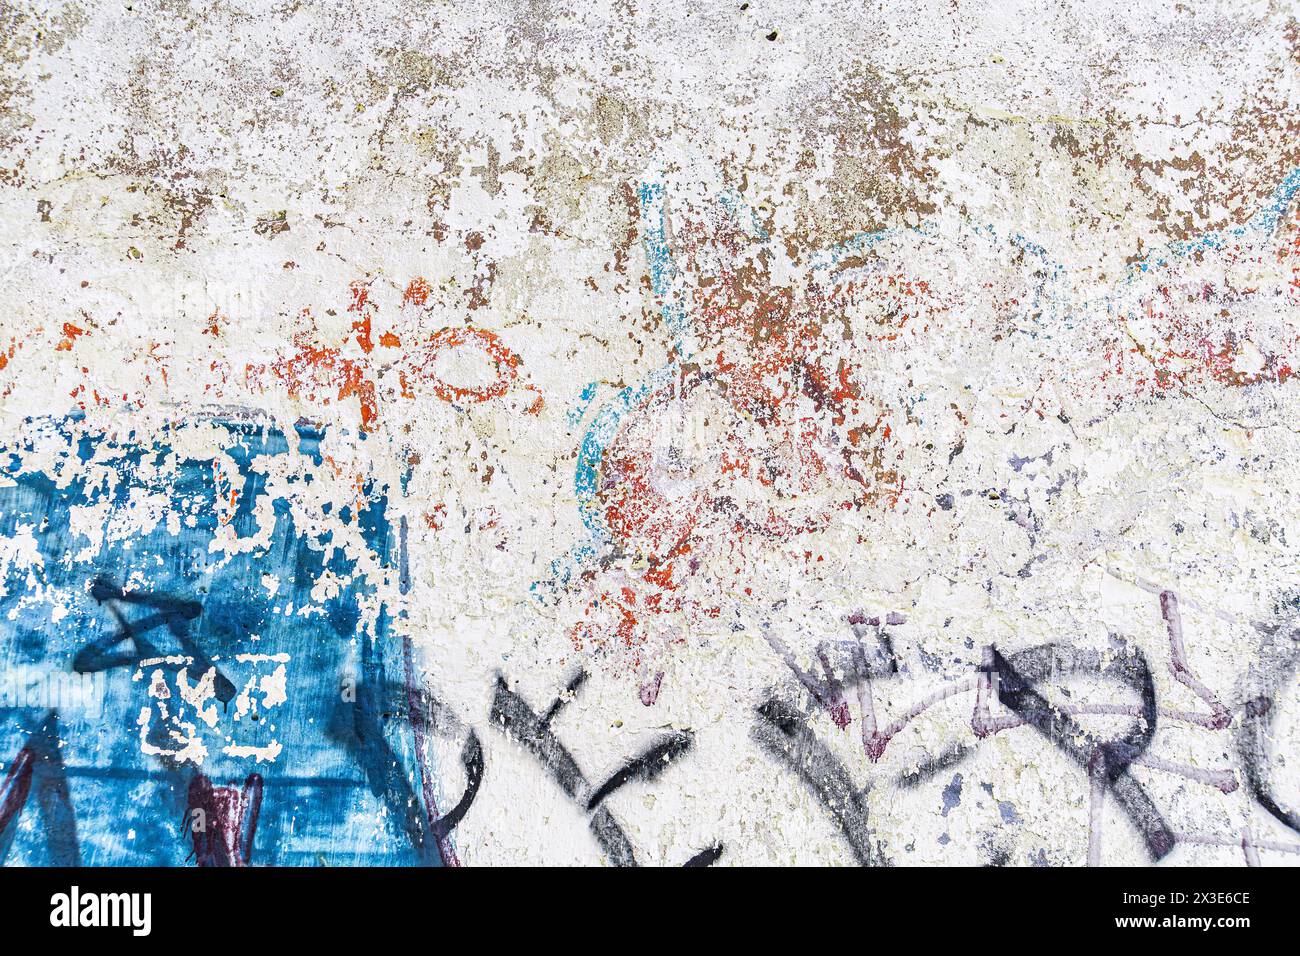 Abstract detailed wall texture with blue graffiti paint. Stock Photo